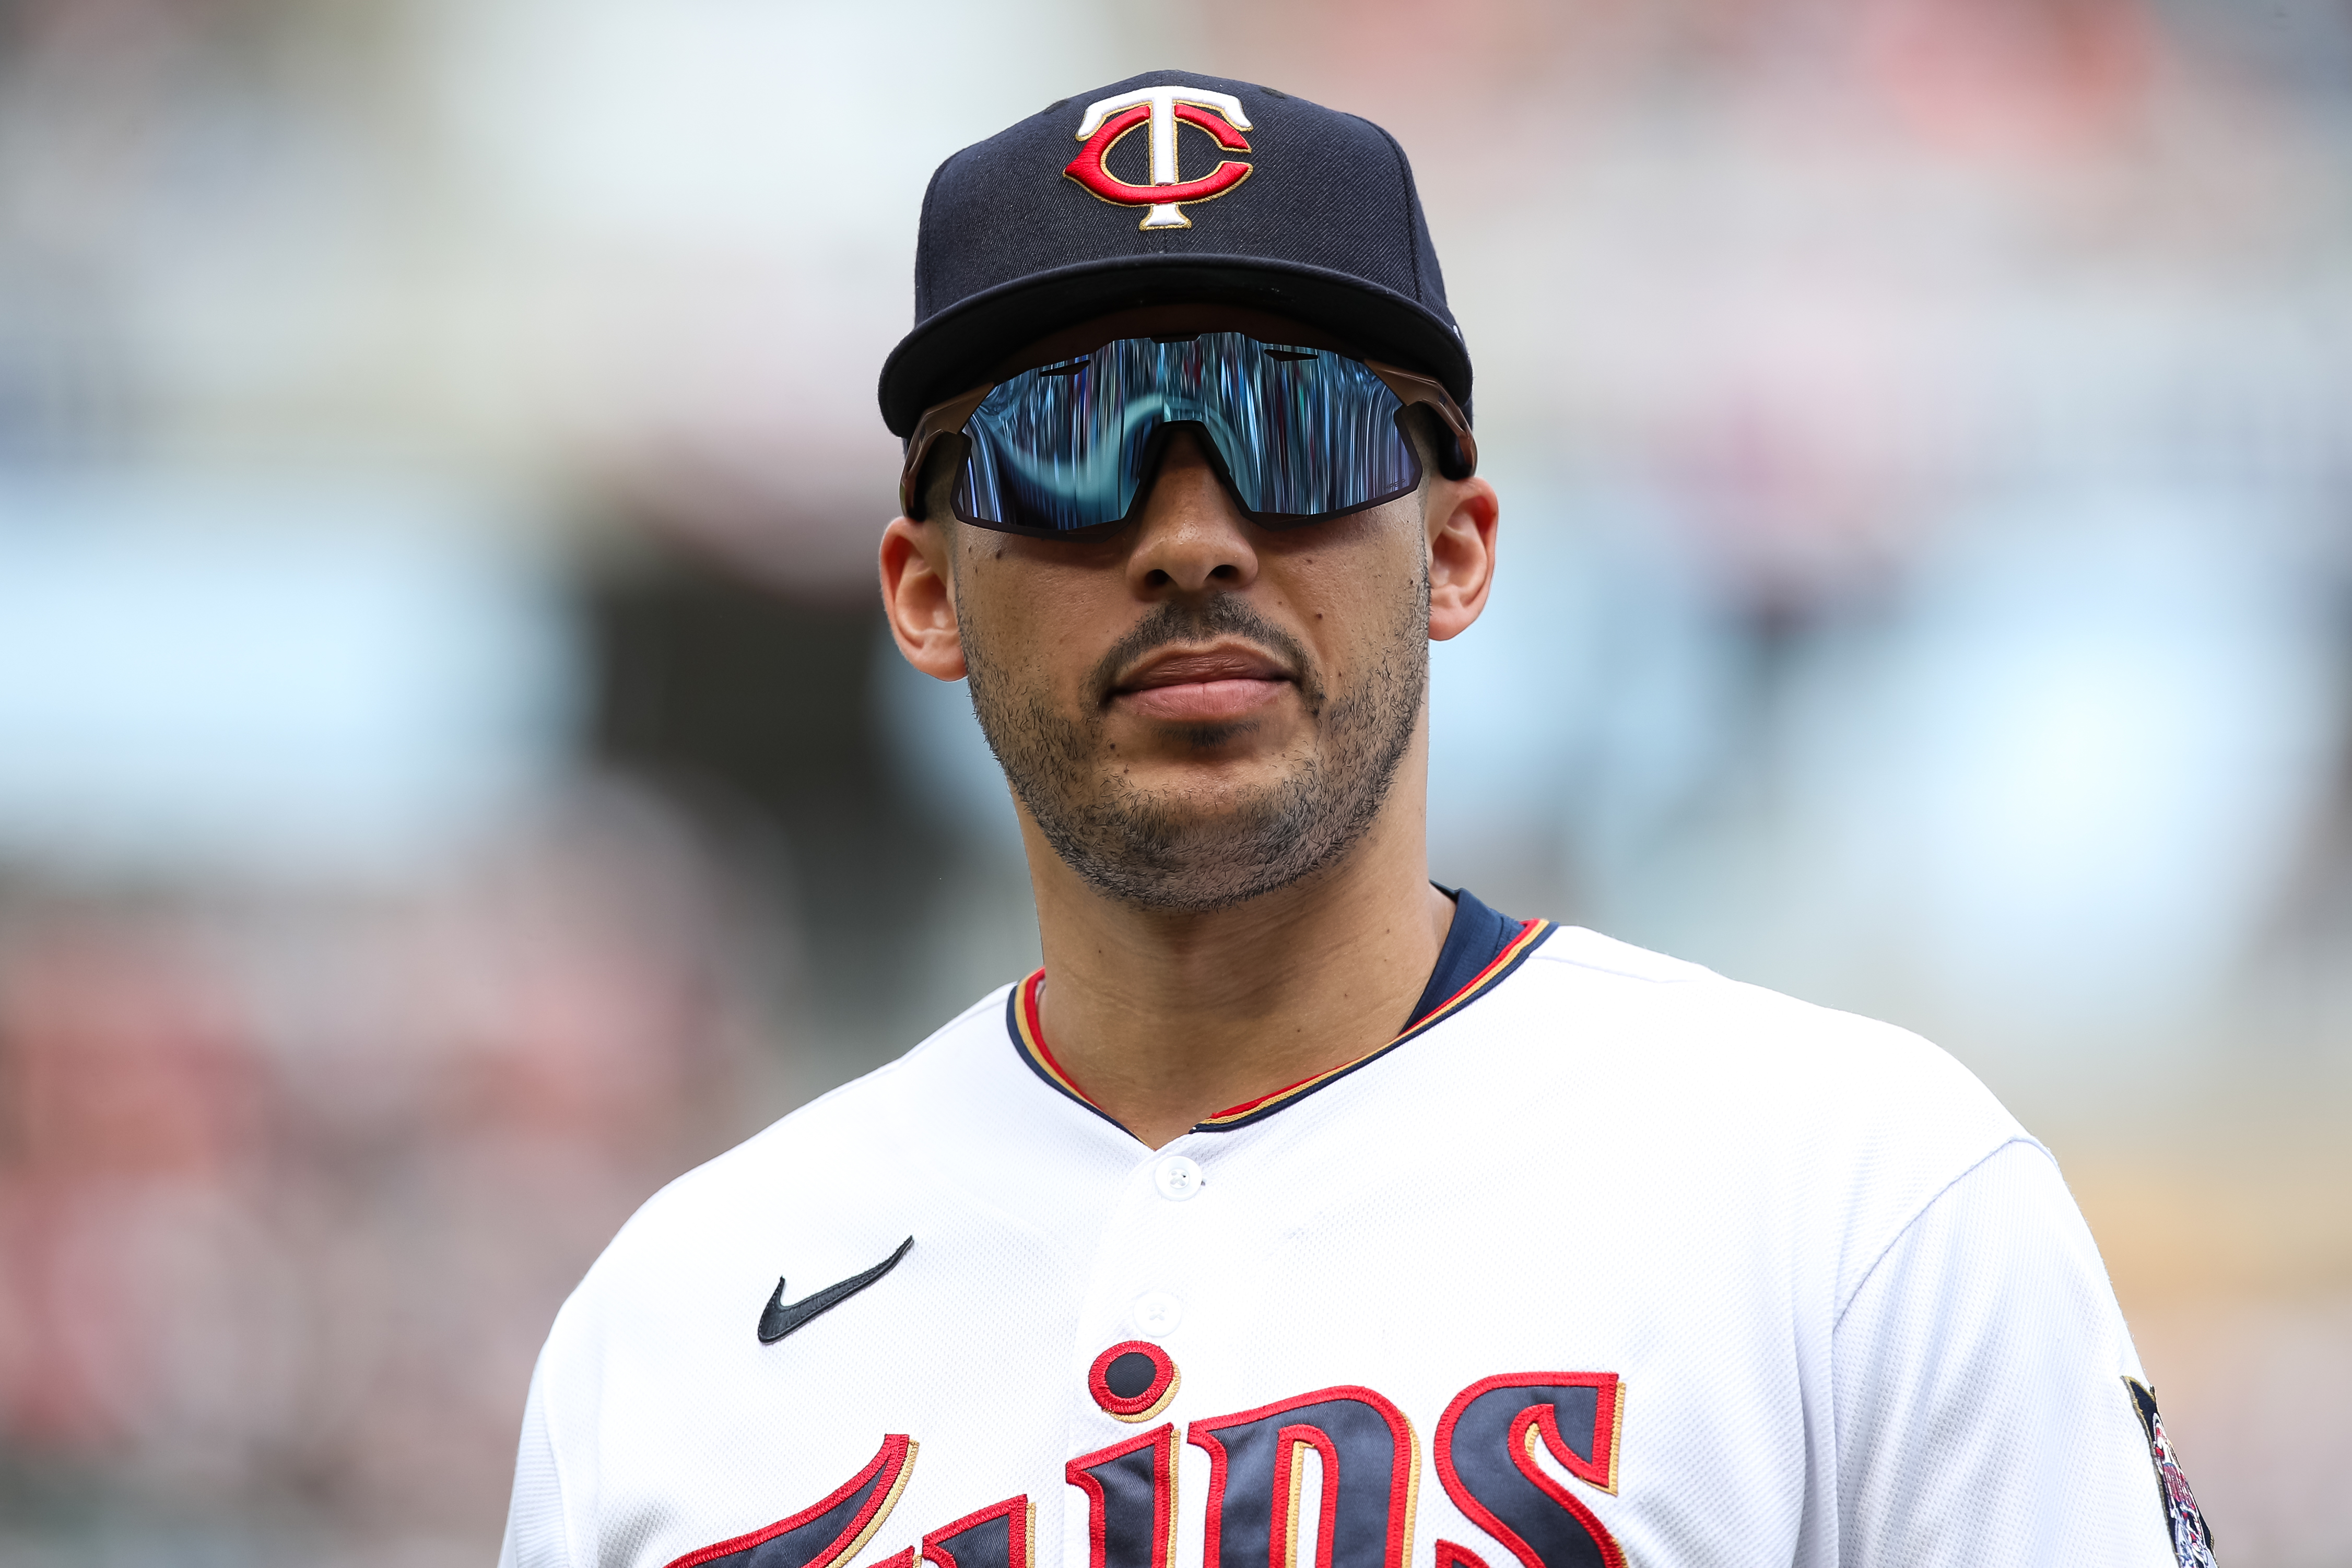 Phillies interested in all 4 star shortstops, including Carlos Correa   Phillies Nation - Your source for Philadelphia Phillies news, opinion,  history, rumors, events, and other fun stuff.